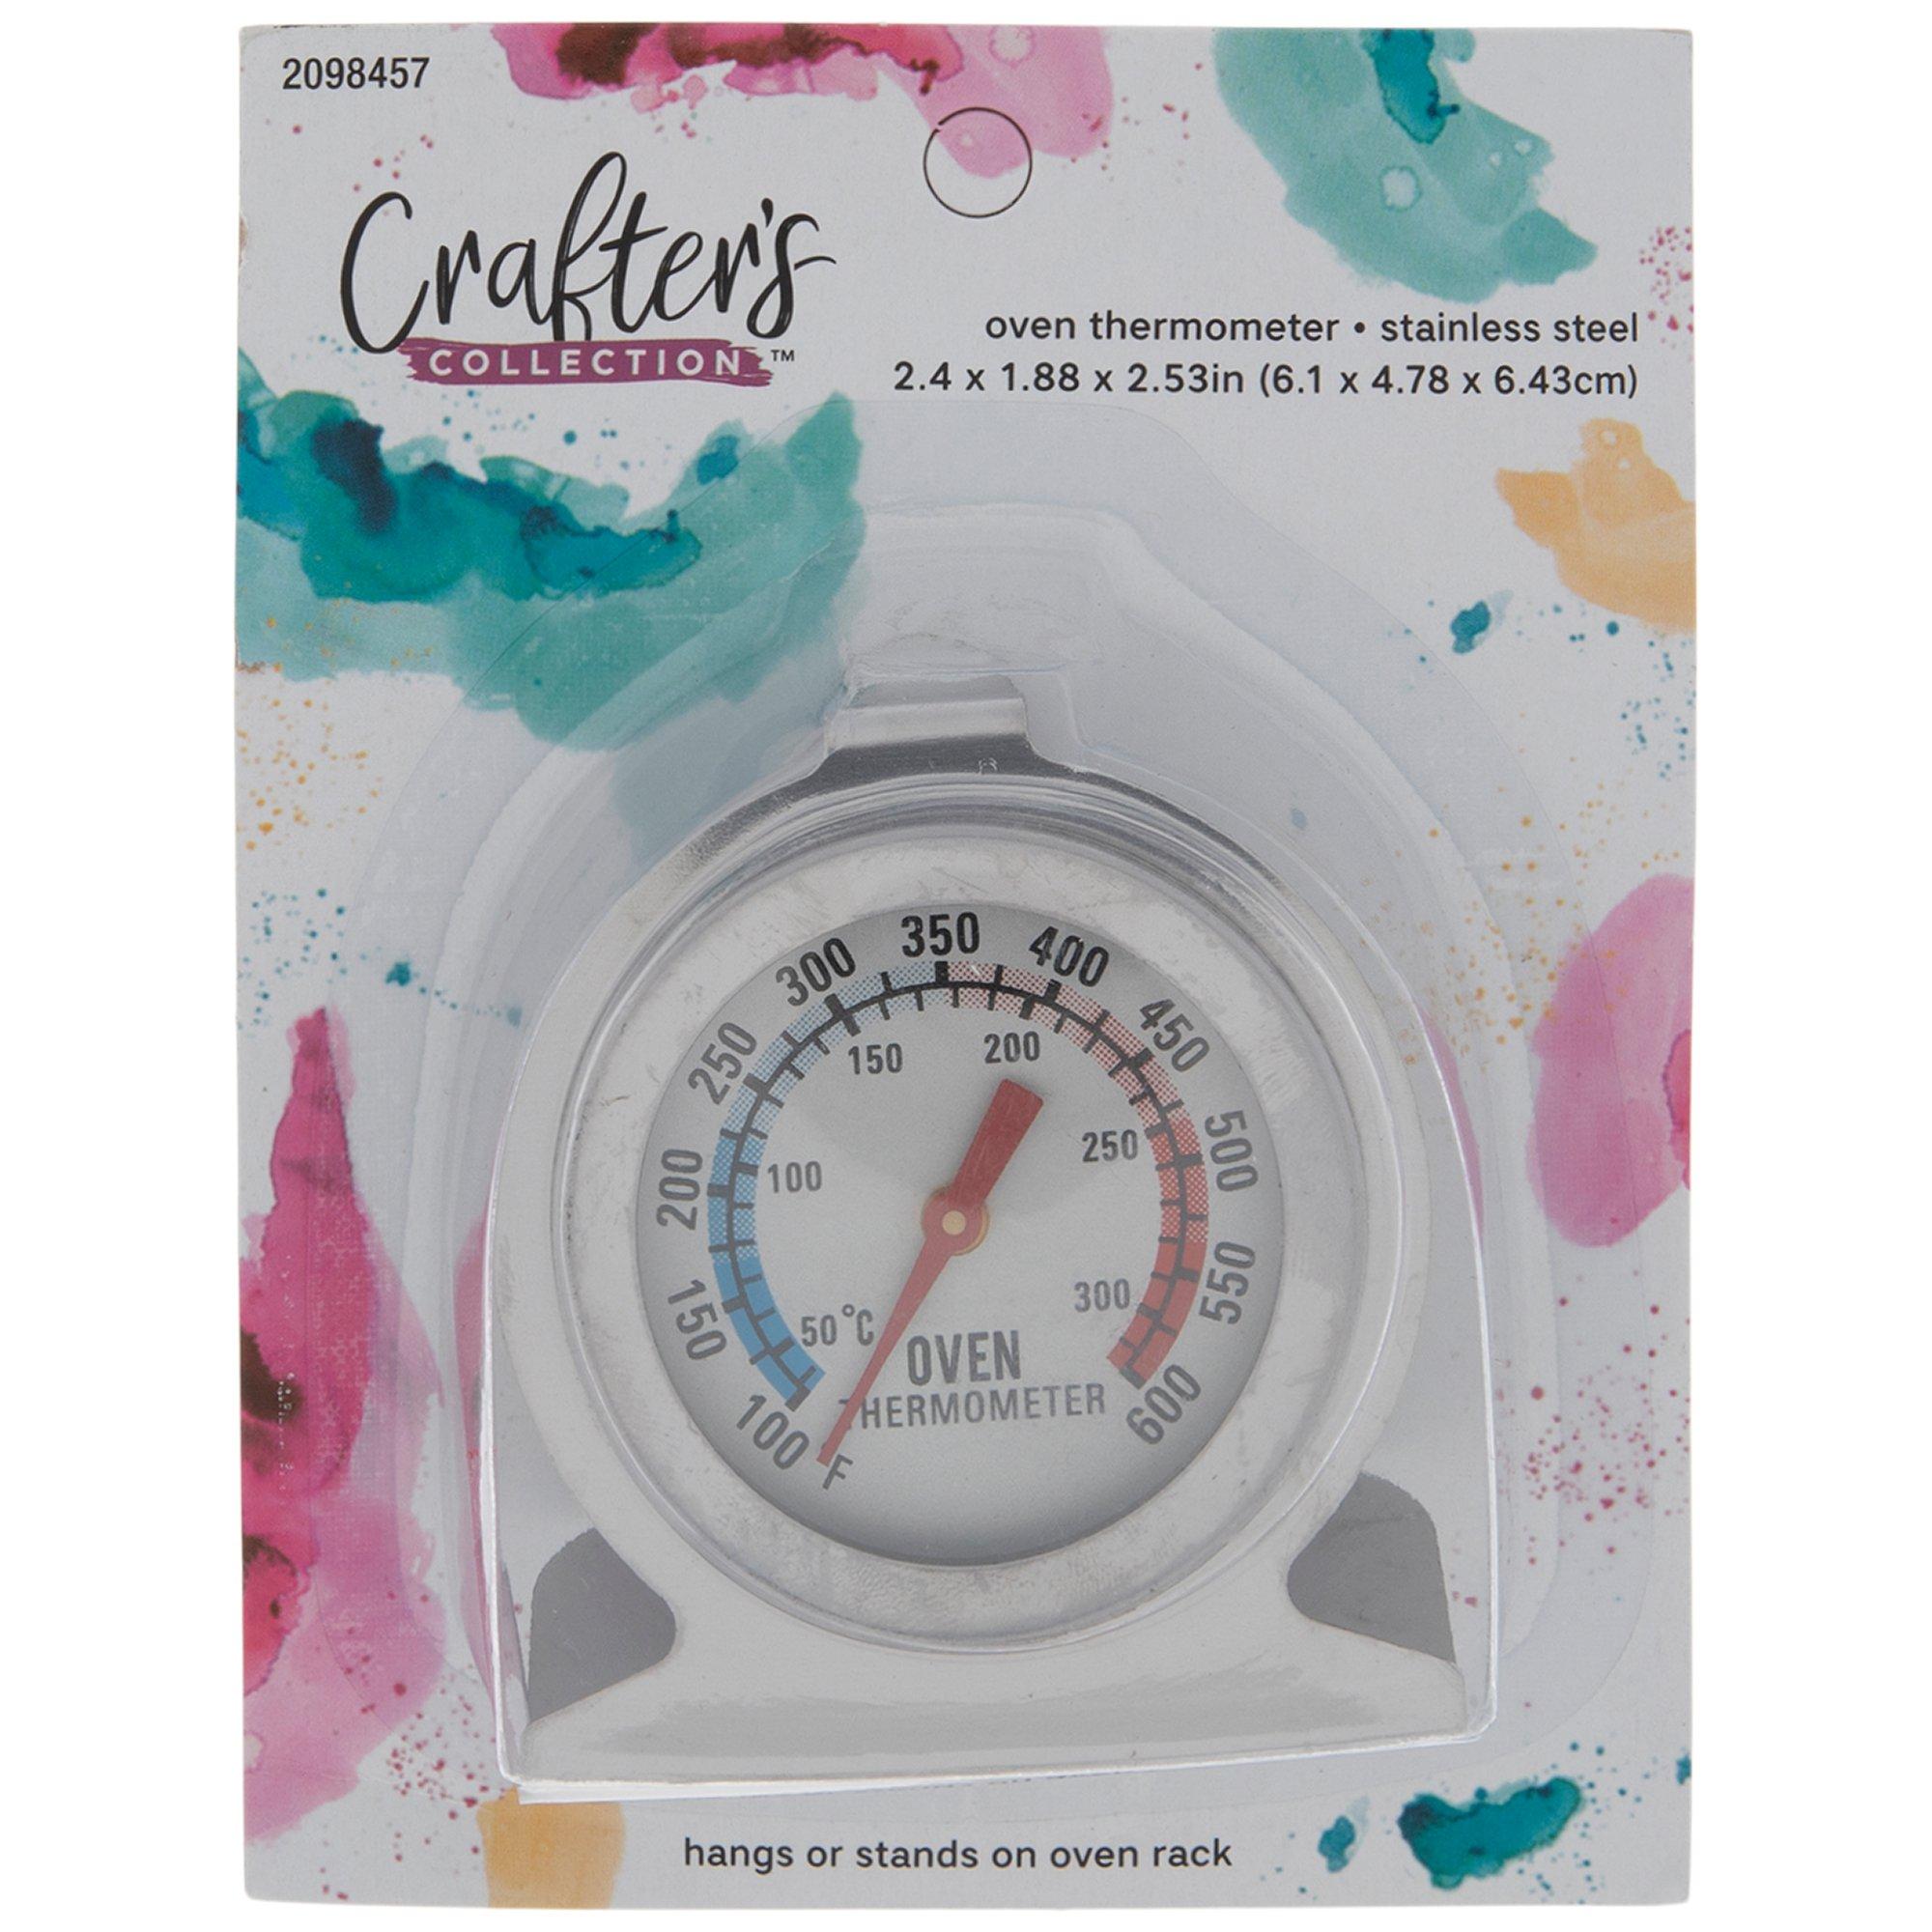 XWQ Oven Thermometer Multi-purpose Heat Resistant Stainless Steel